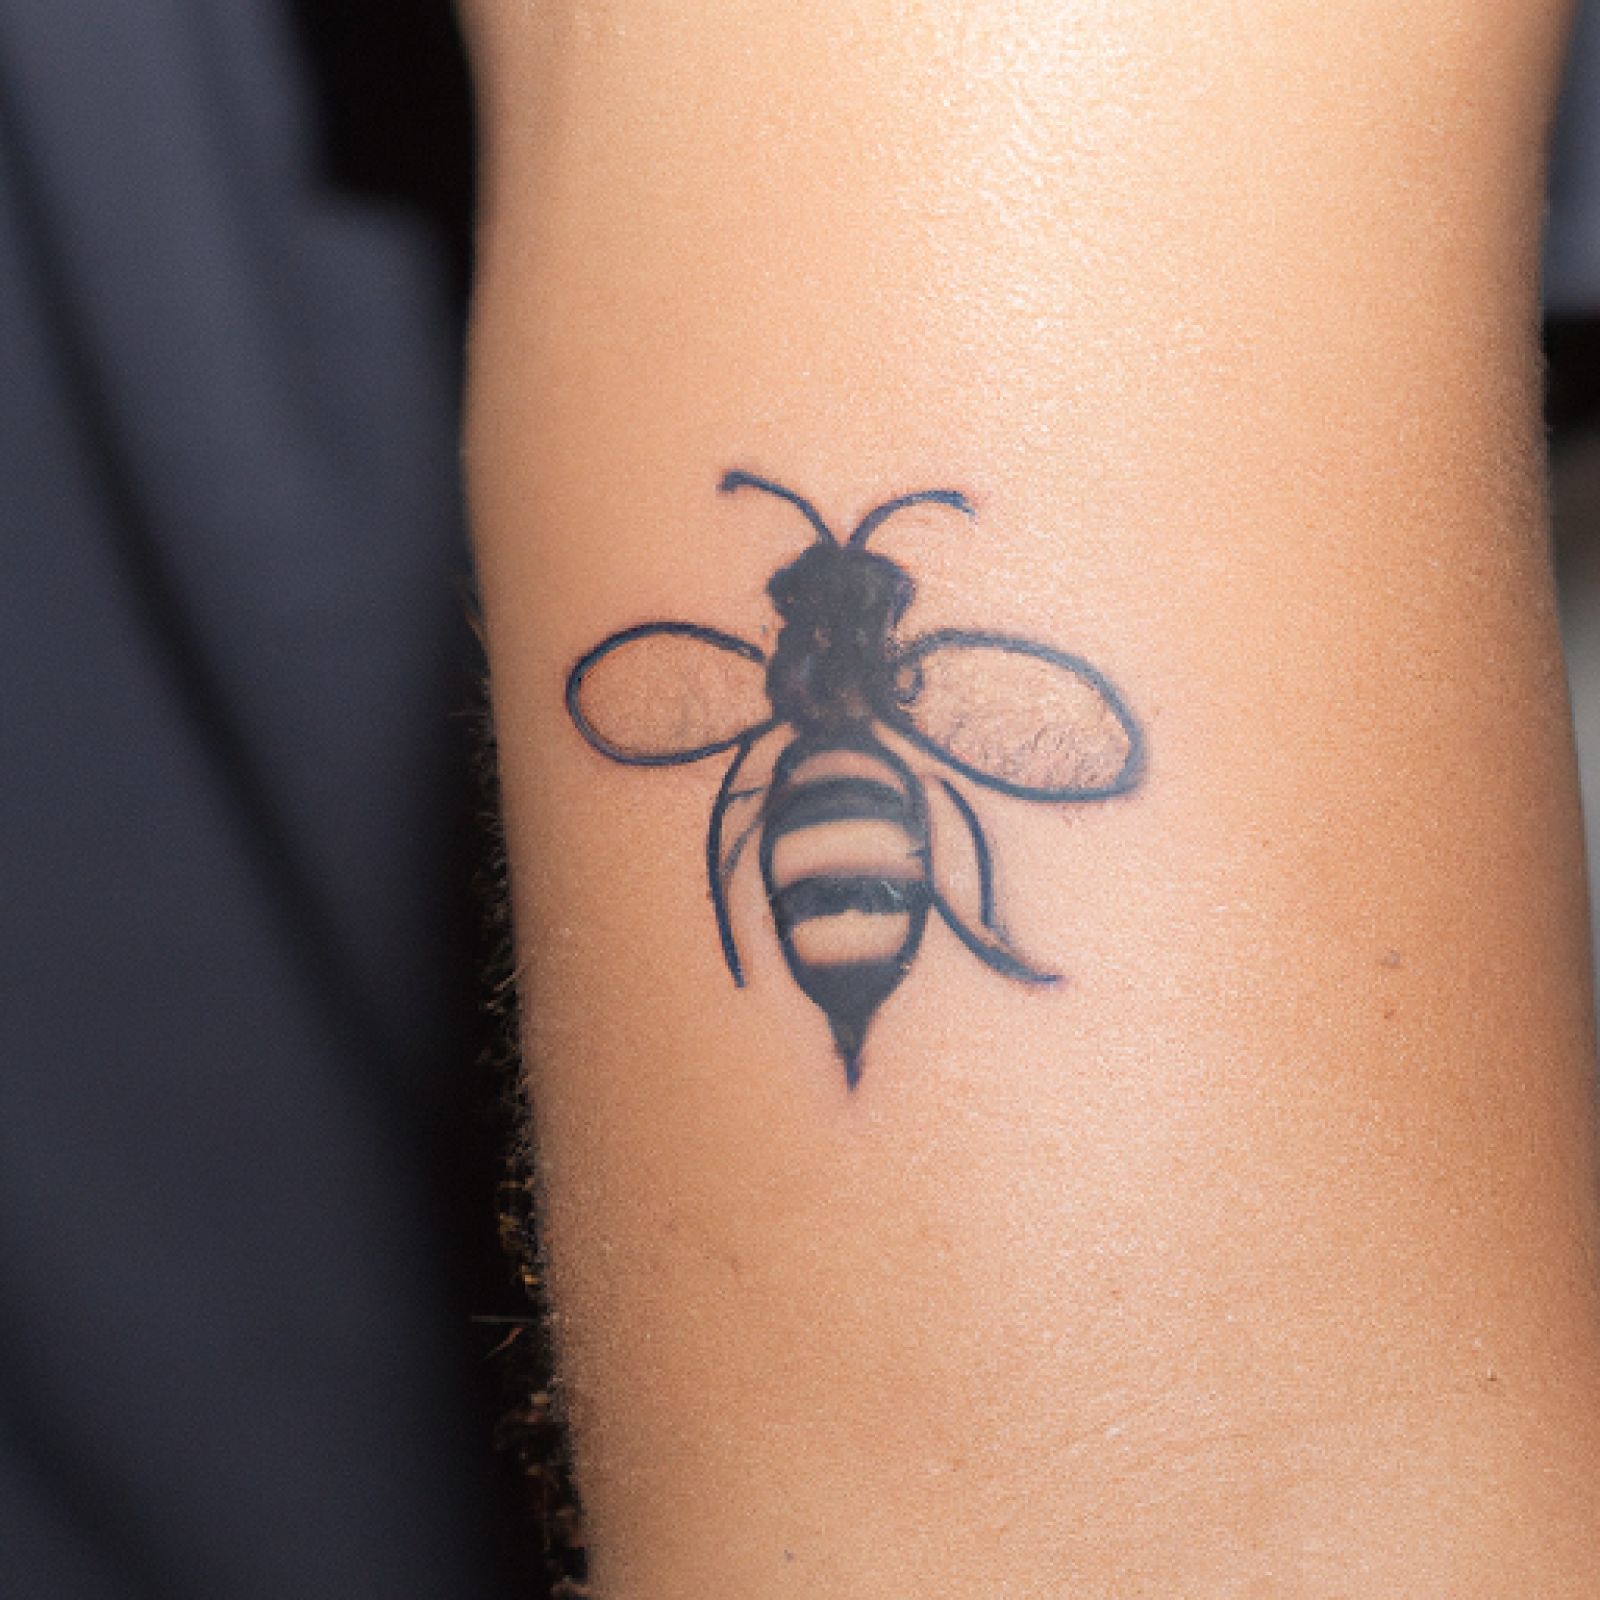 Bee tattoo on forearm for men